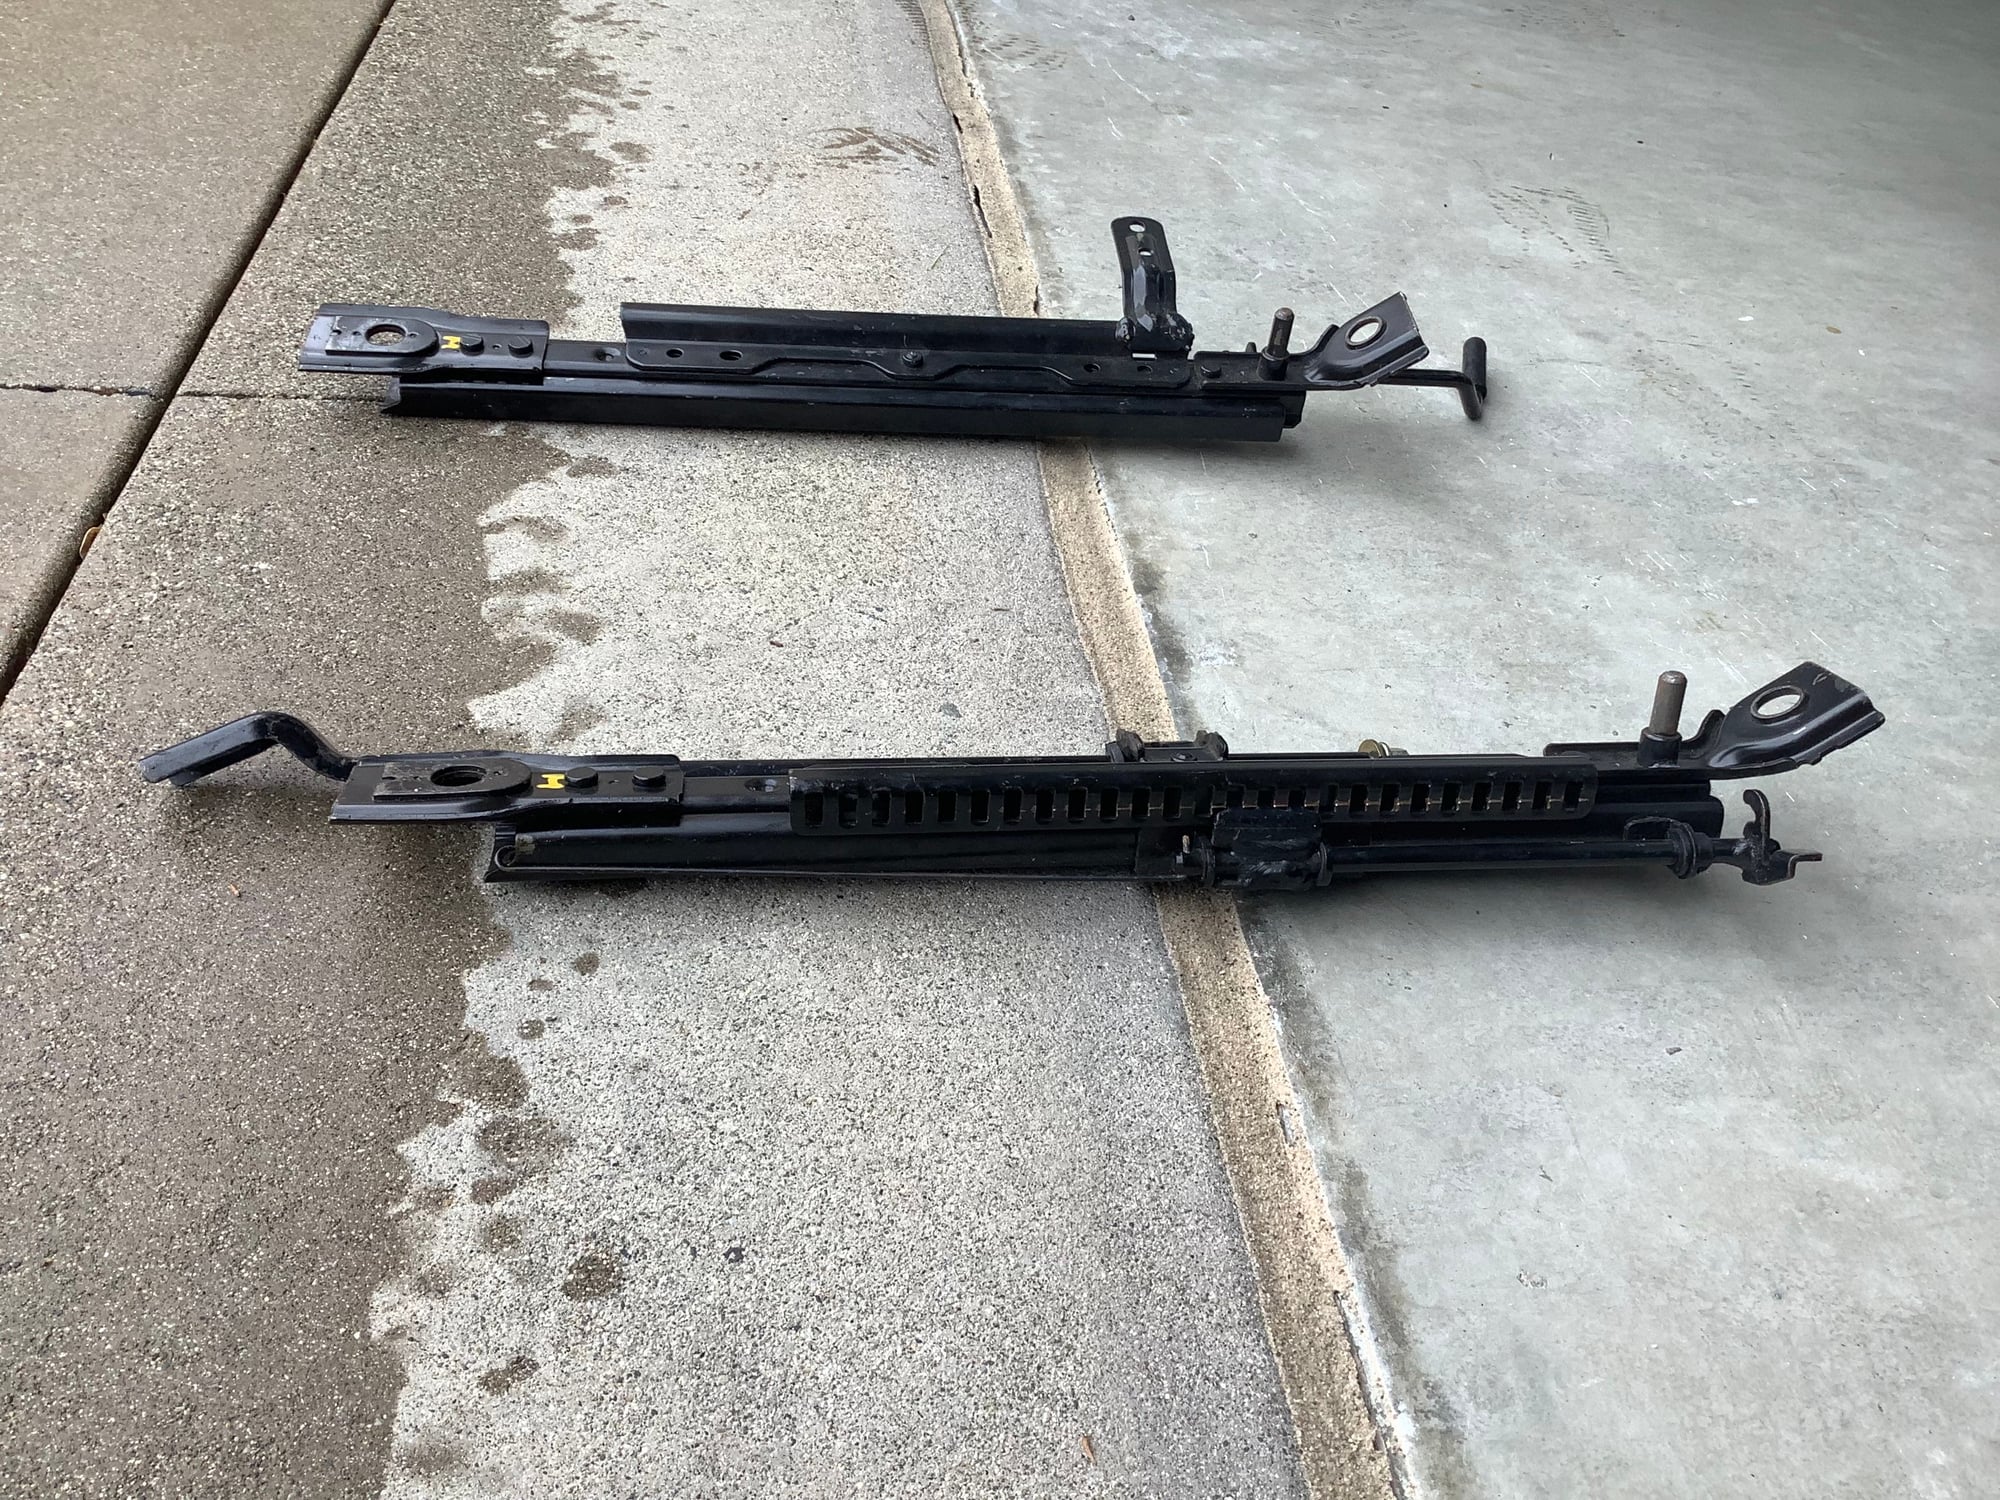 Interior/Upholstery - 93 94 95 OEM Mazda RX7 FD3S Manual Seat Track Rail Slider - Left (Driver) Side - Used - 1993 to 1995 Mazda RX-7 - Mission Viejo, CA 92694, United States